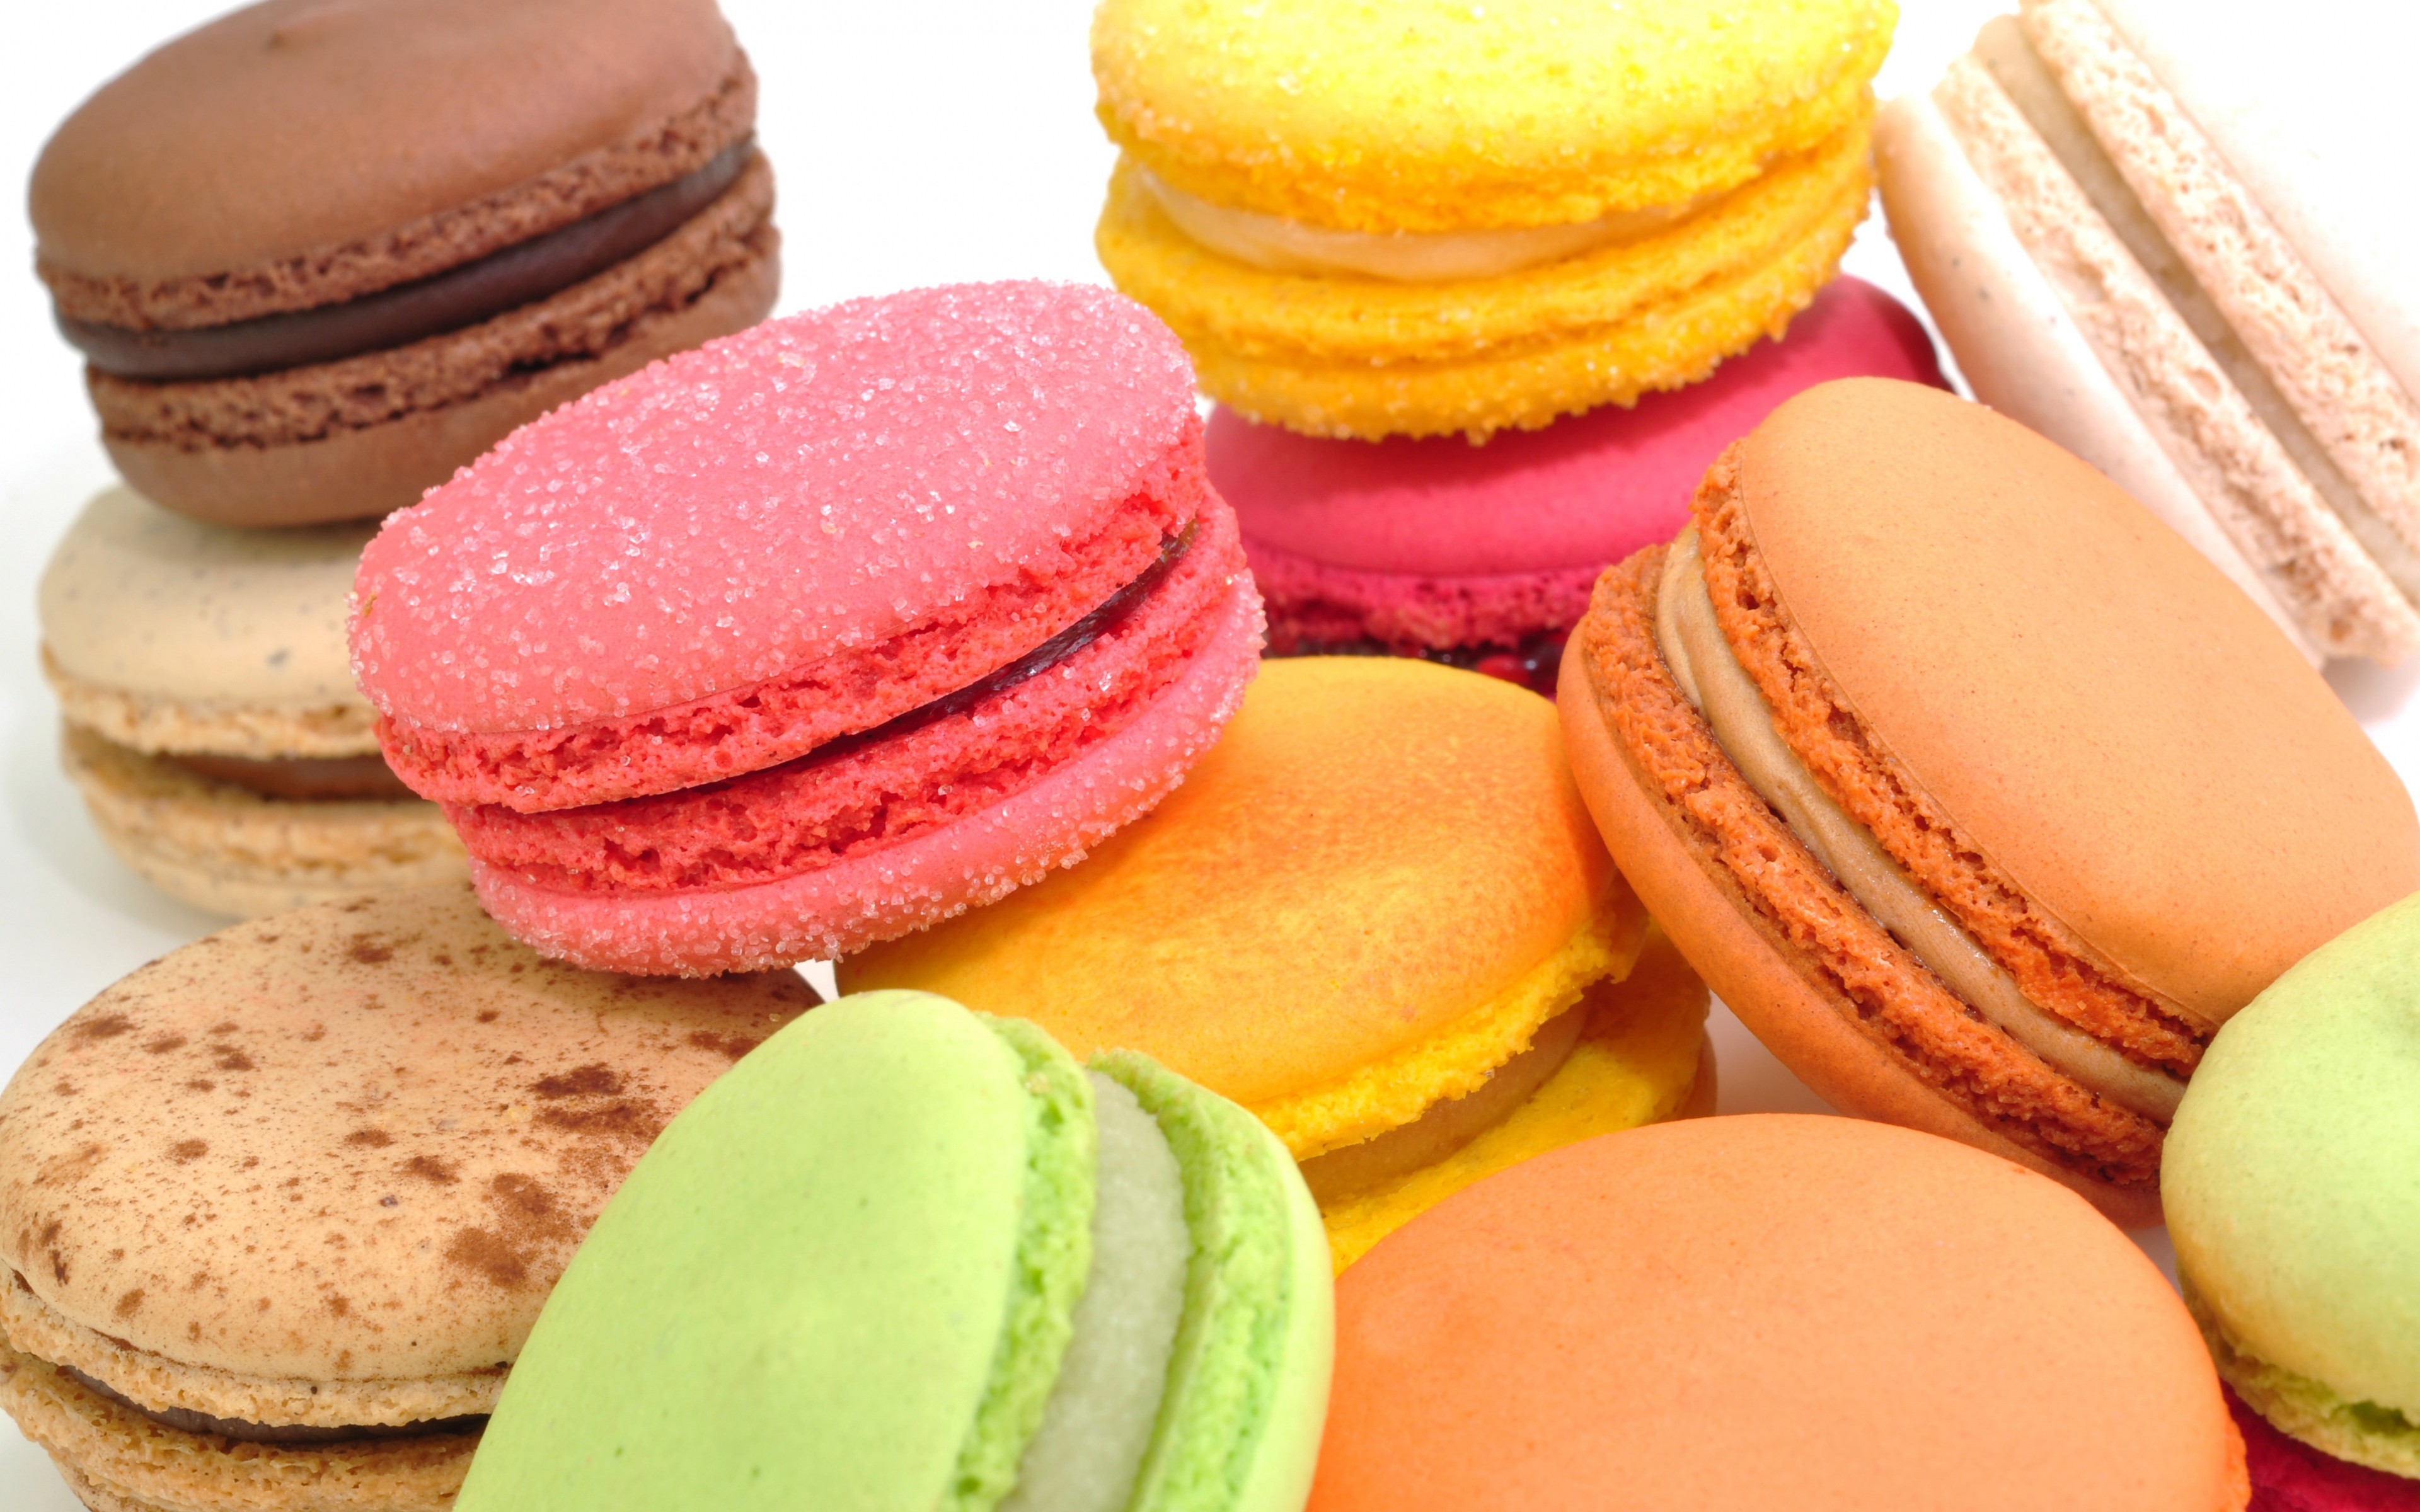 General 3840x2400 food dessert pastries cookies macarons sweets colorful white background closeup